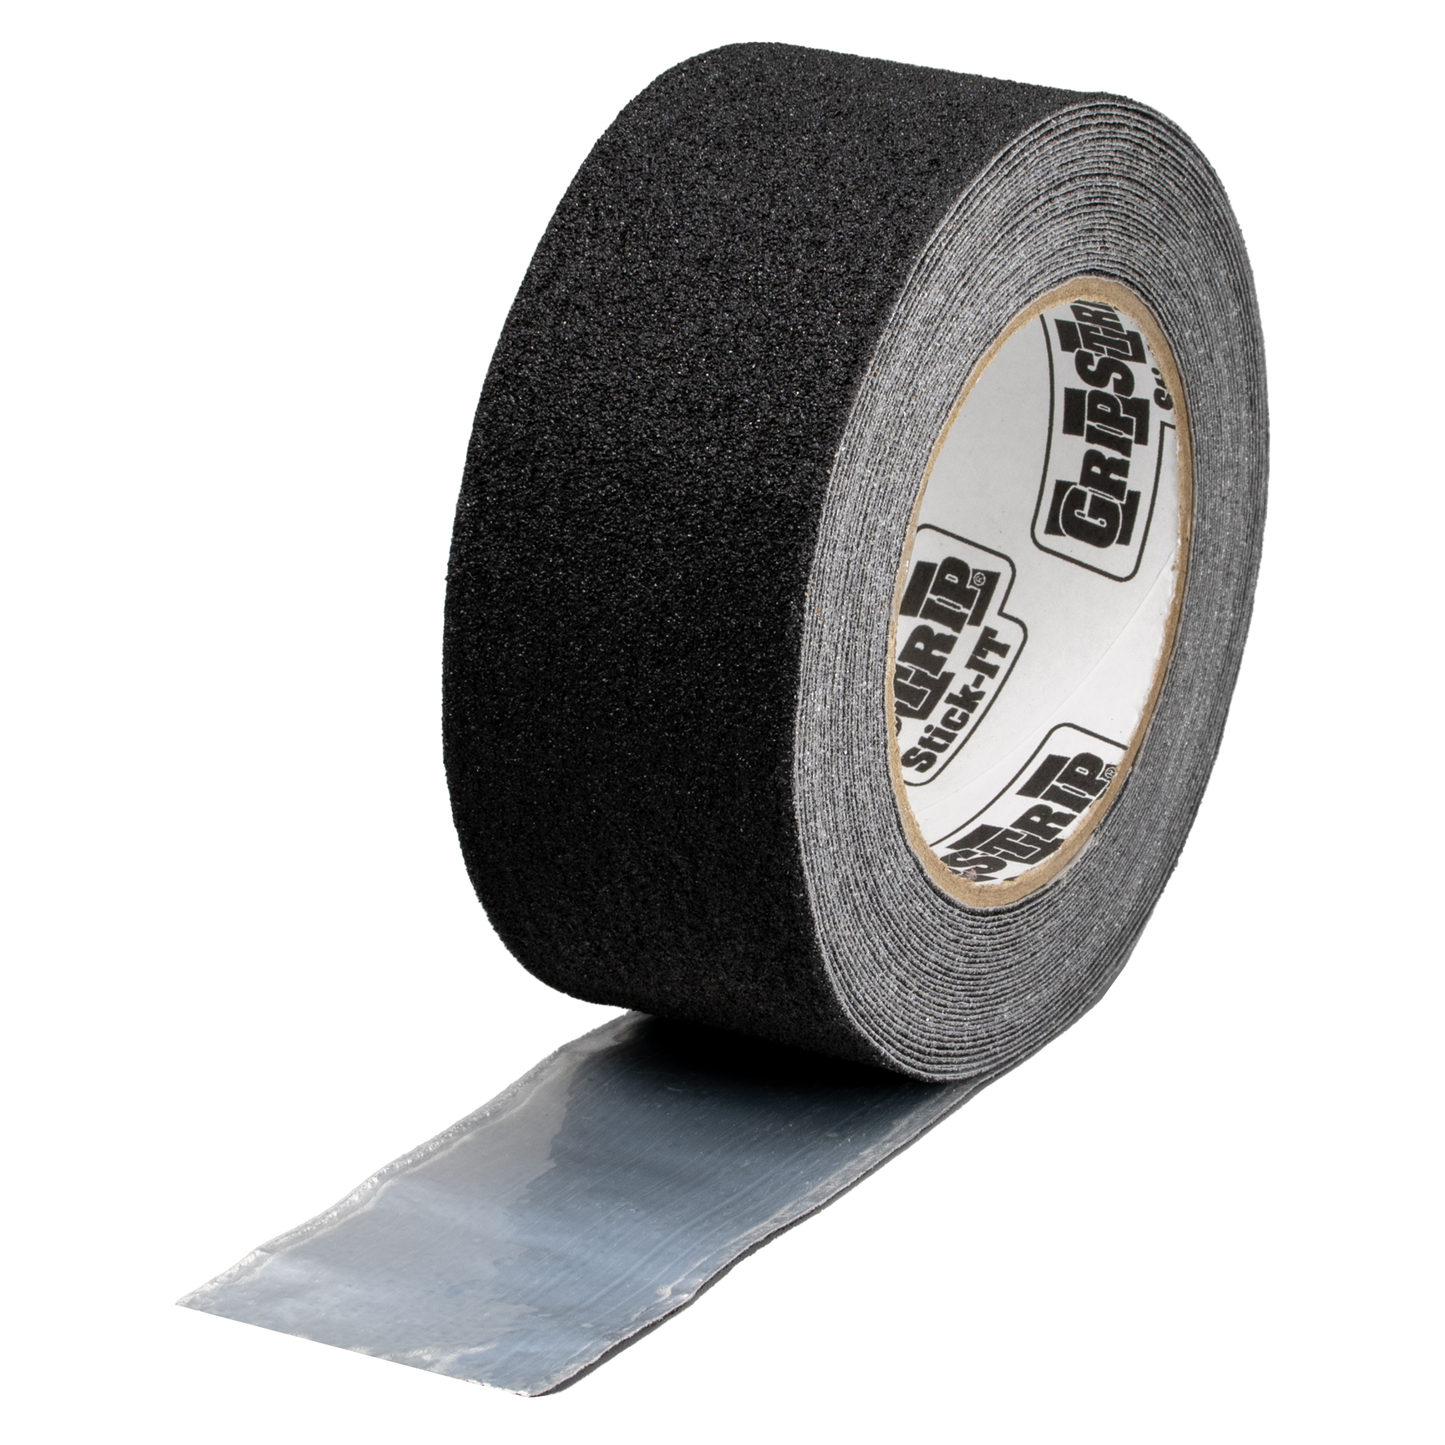 Specialty Tapes - Aluminum backing - 2" width 30 ft